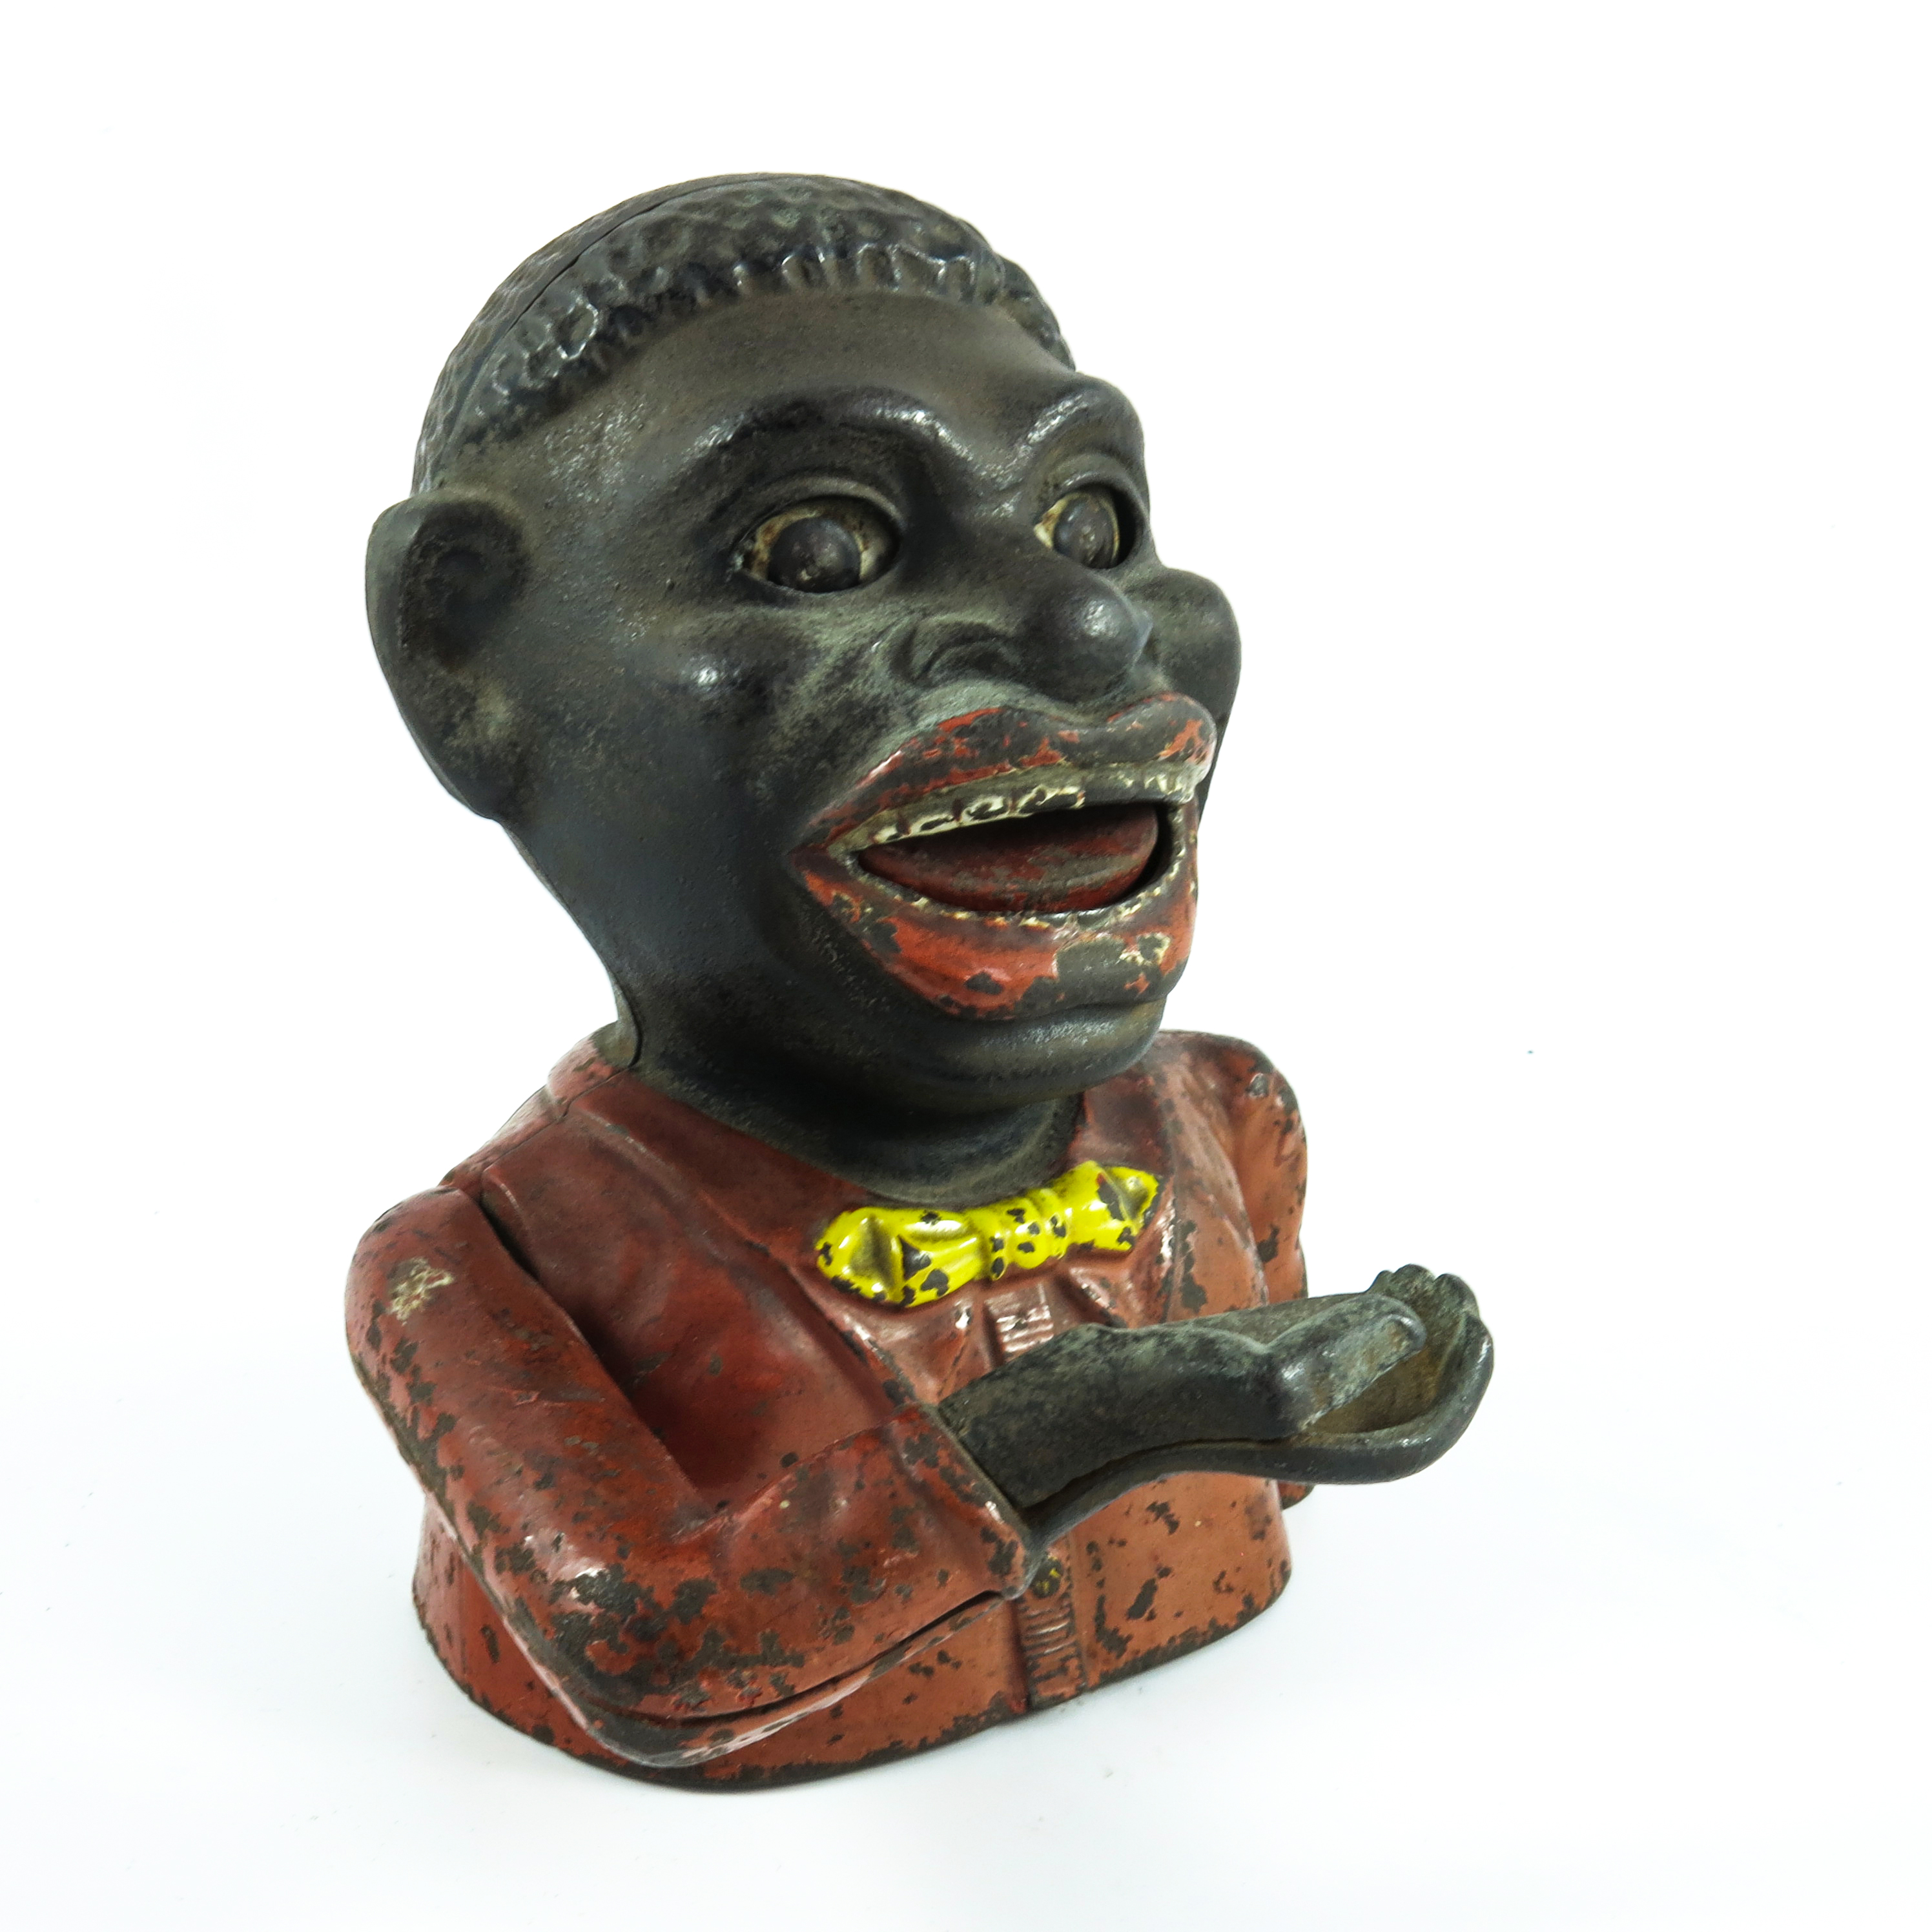 'JOLLY NIGGER' ORIGINAL CAST IRON MECHANICAL MONEY BOX, RED POLYCHROME DECORATION WITH YELLOW BOW